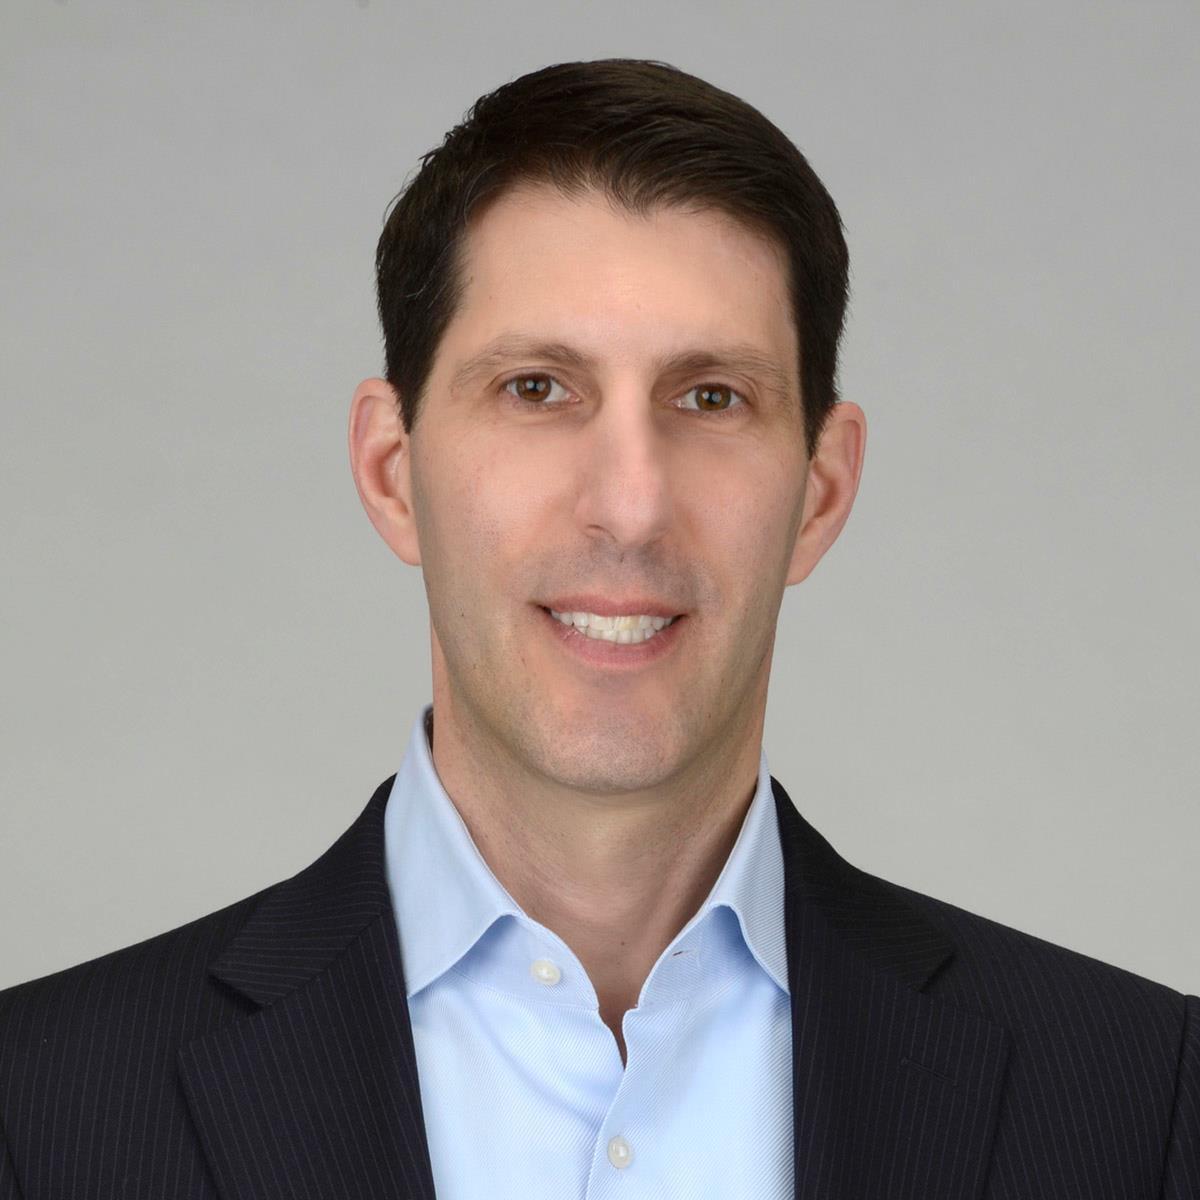 BRYAN CASTELLANI APPOINTED CHIEF FINANCIAL OFFICER FOR WARNER MUSIC GROUP